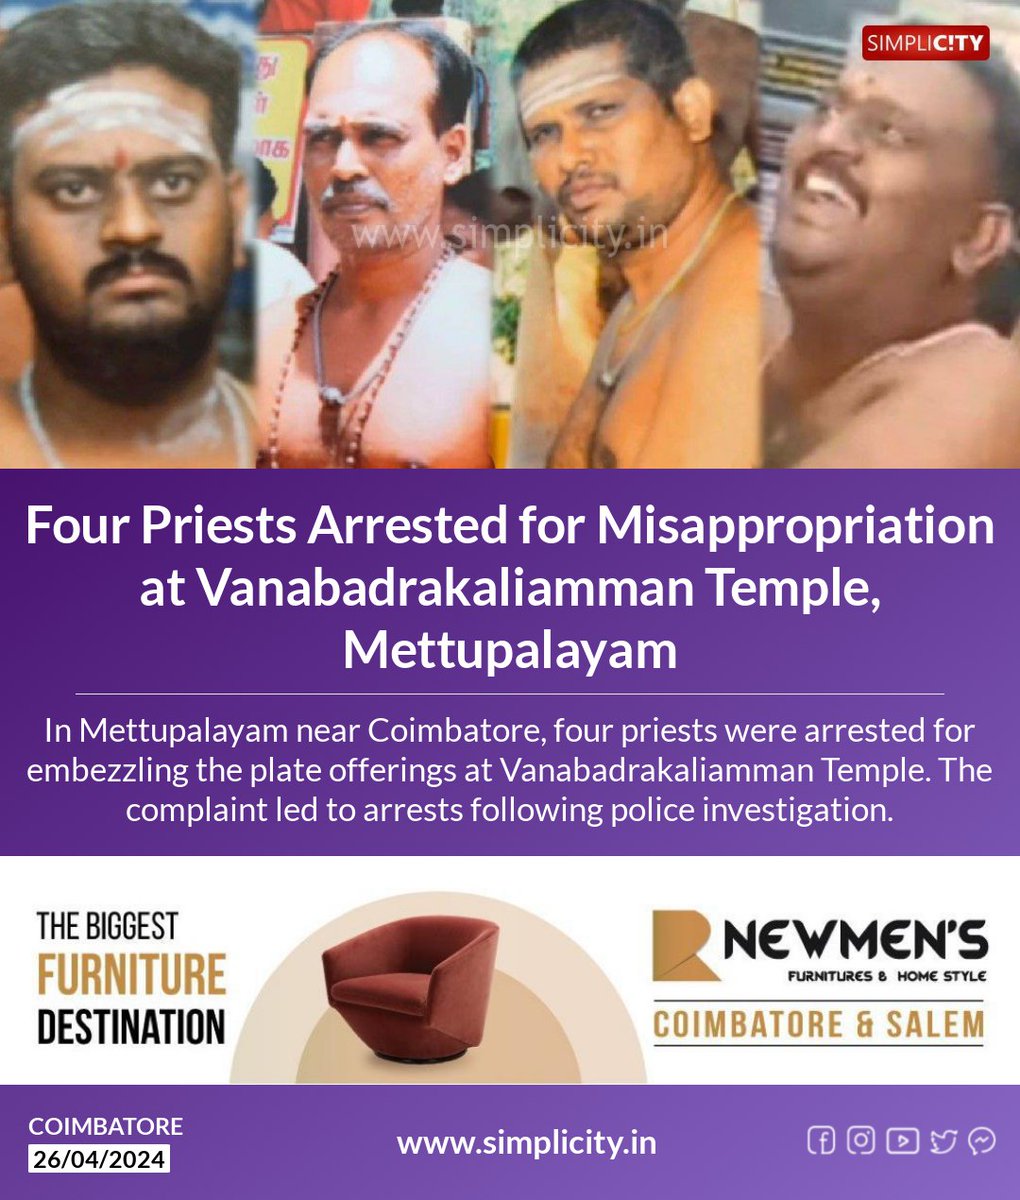 Four Priests Arrested for Misappropriation at Vanabadrakaliamman Temple, #Mettupalayam simplicity.in/coimbatore/eng…